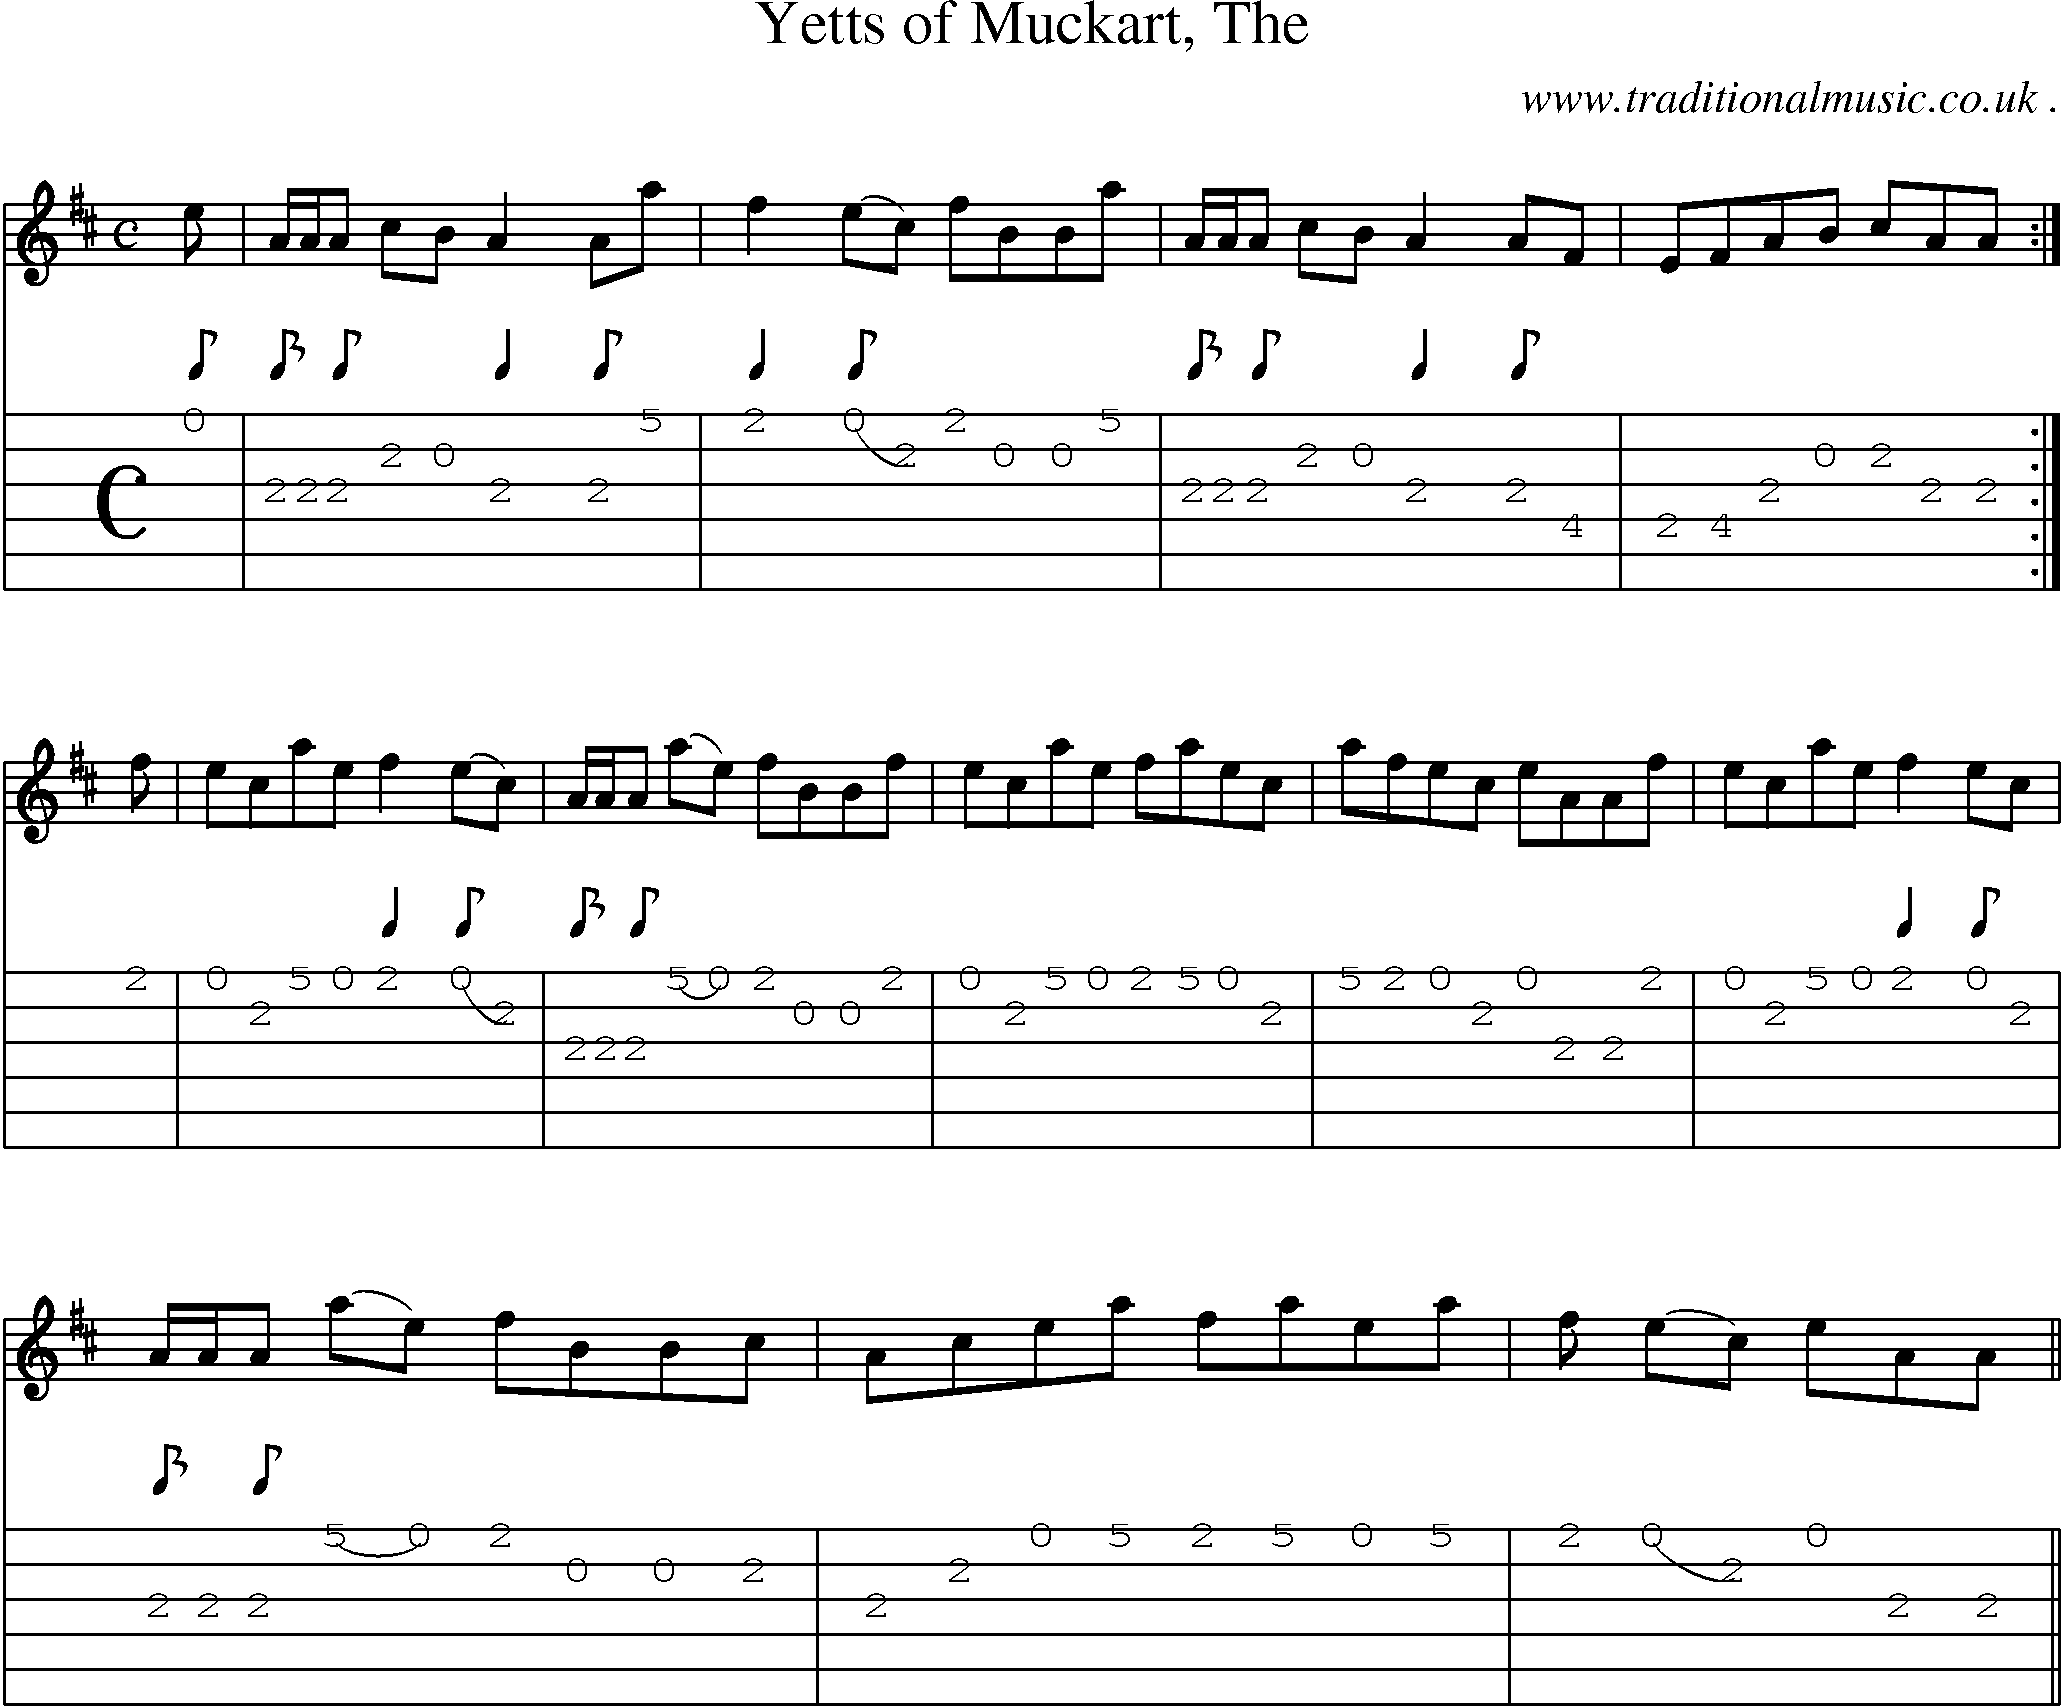 Sheet-music  score, Chords and Guitar Tabs for Yetts Of Muckart The